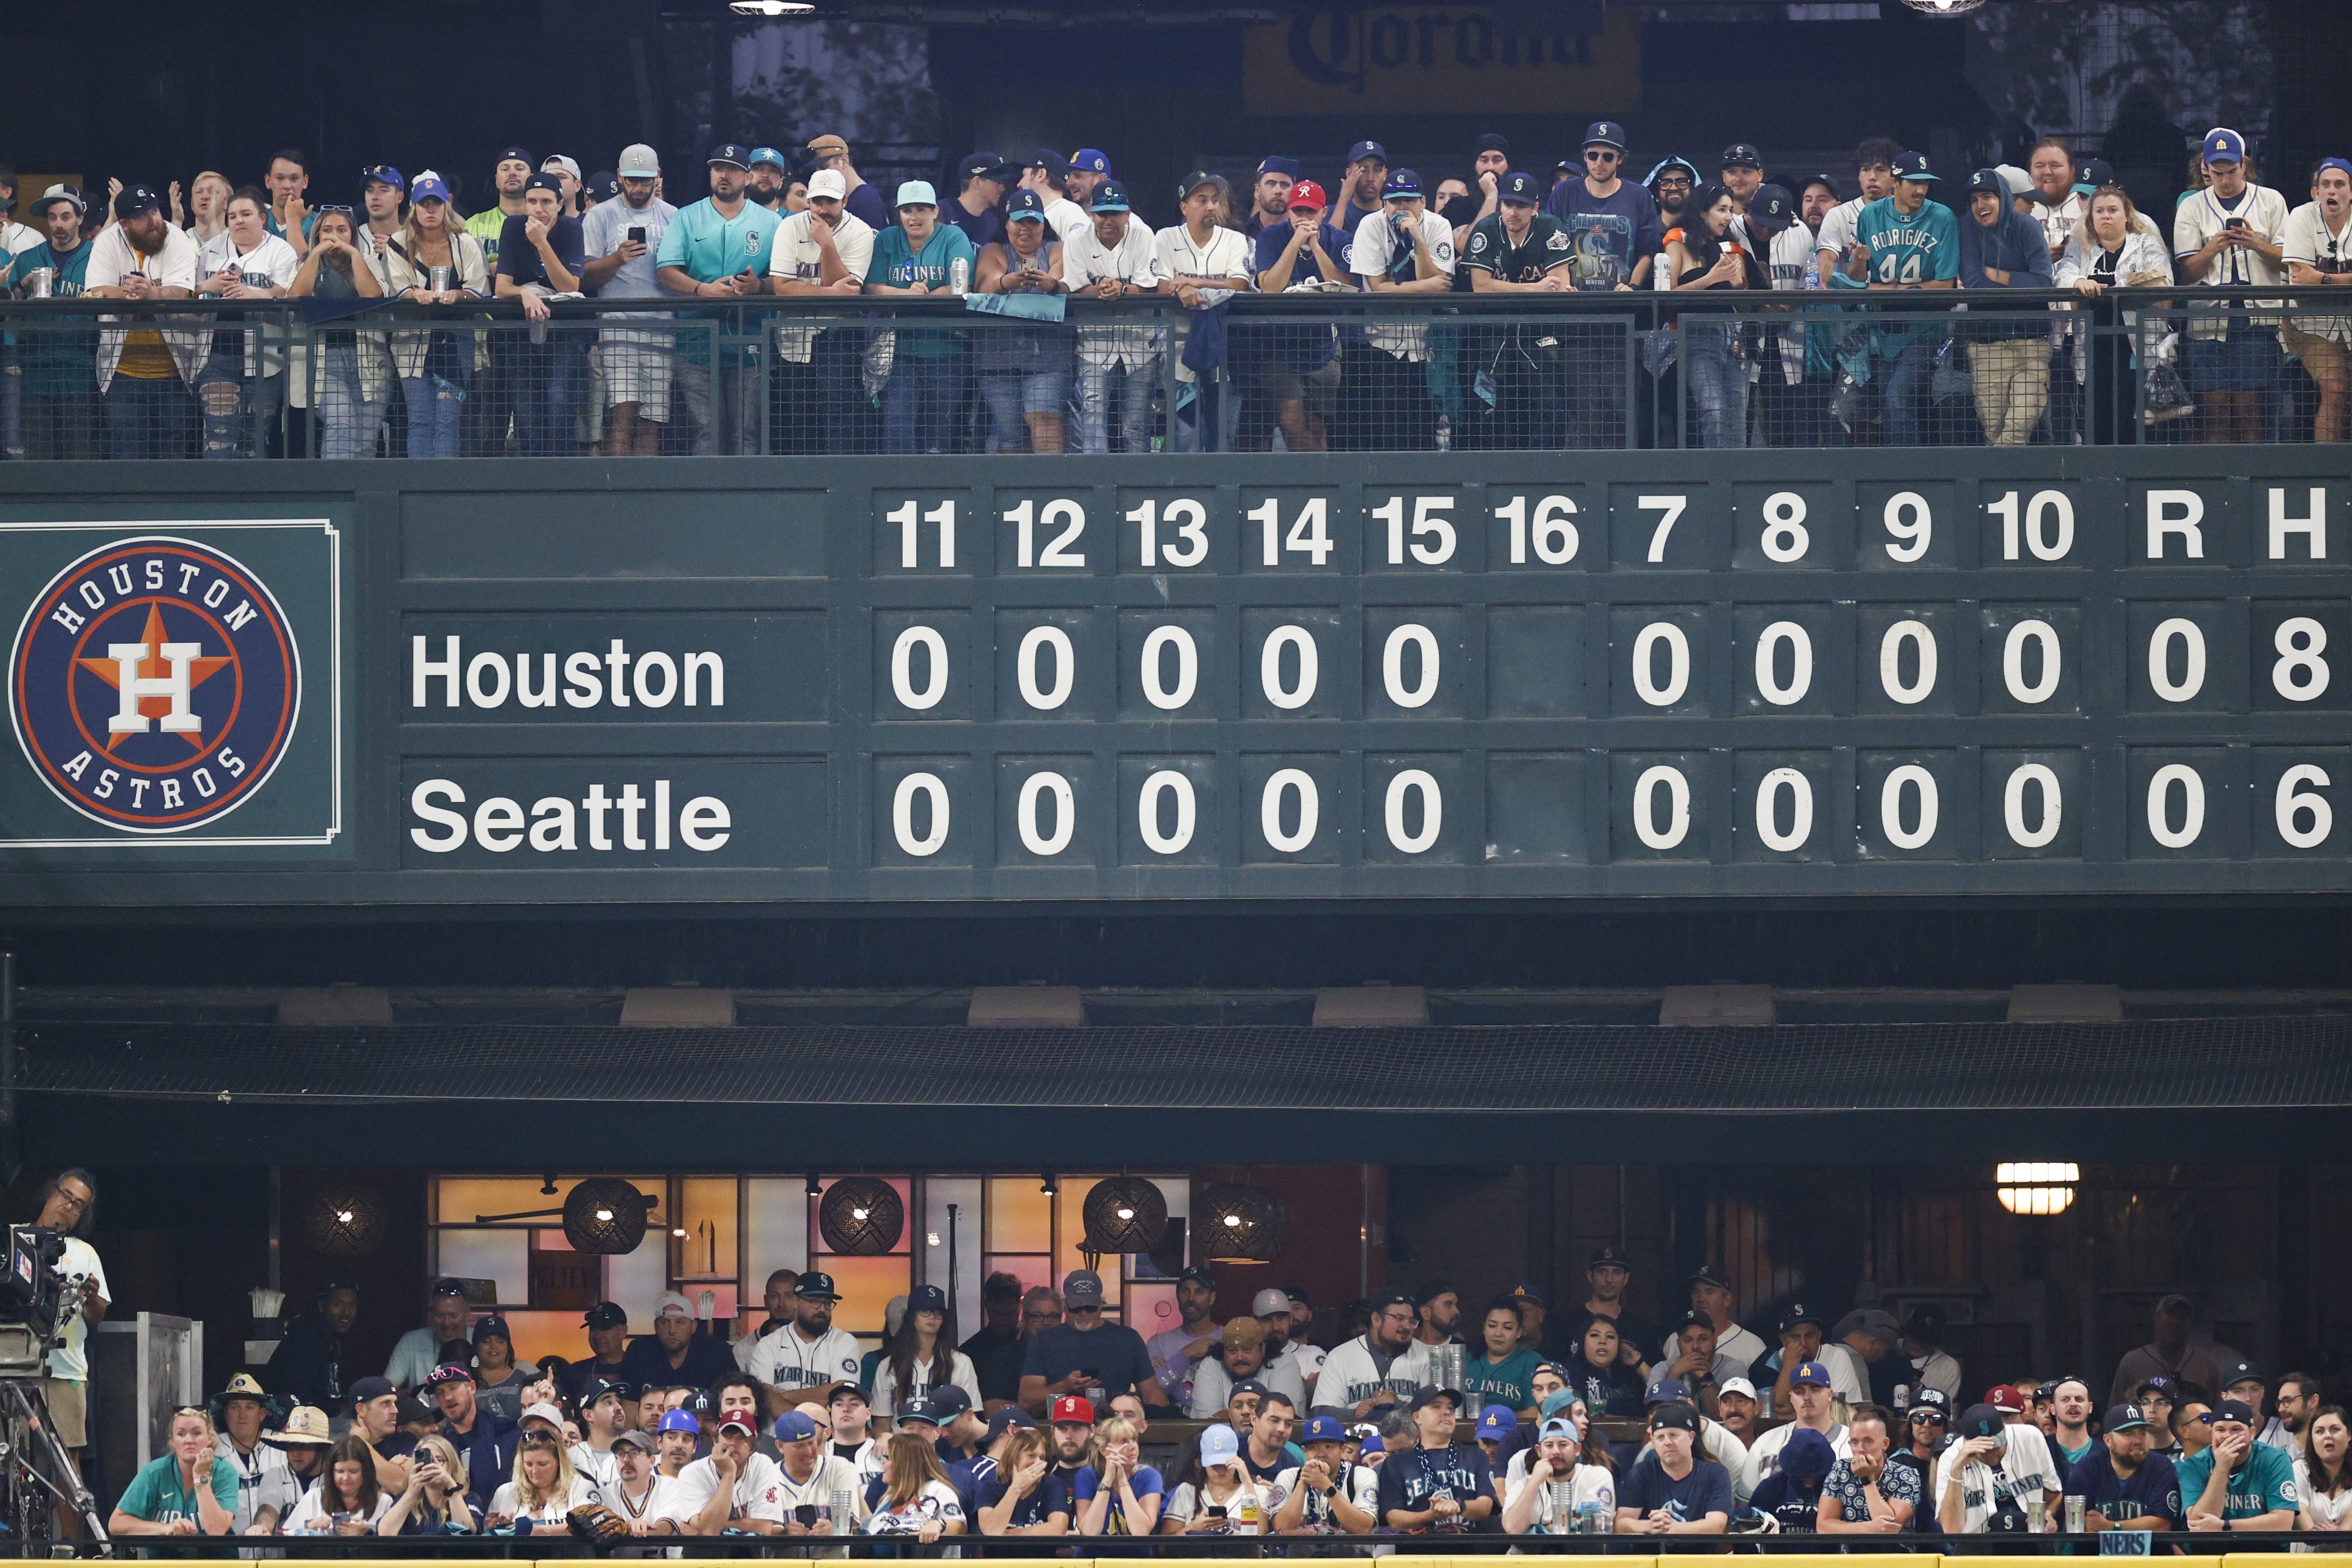 What is the score of the Houston Astros game?